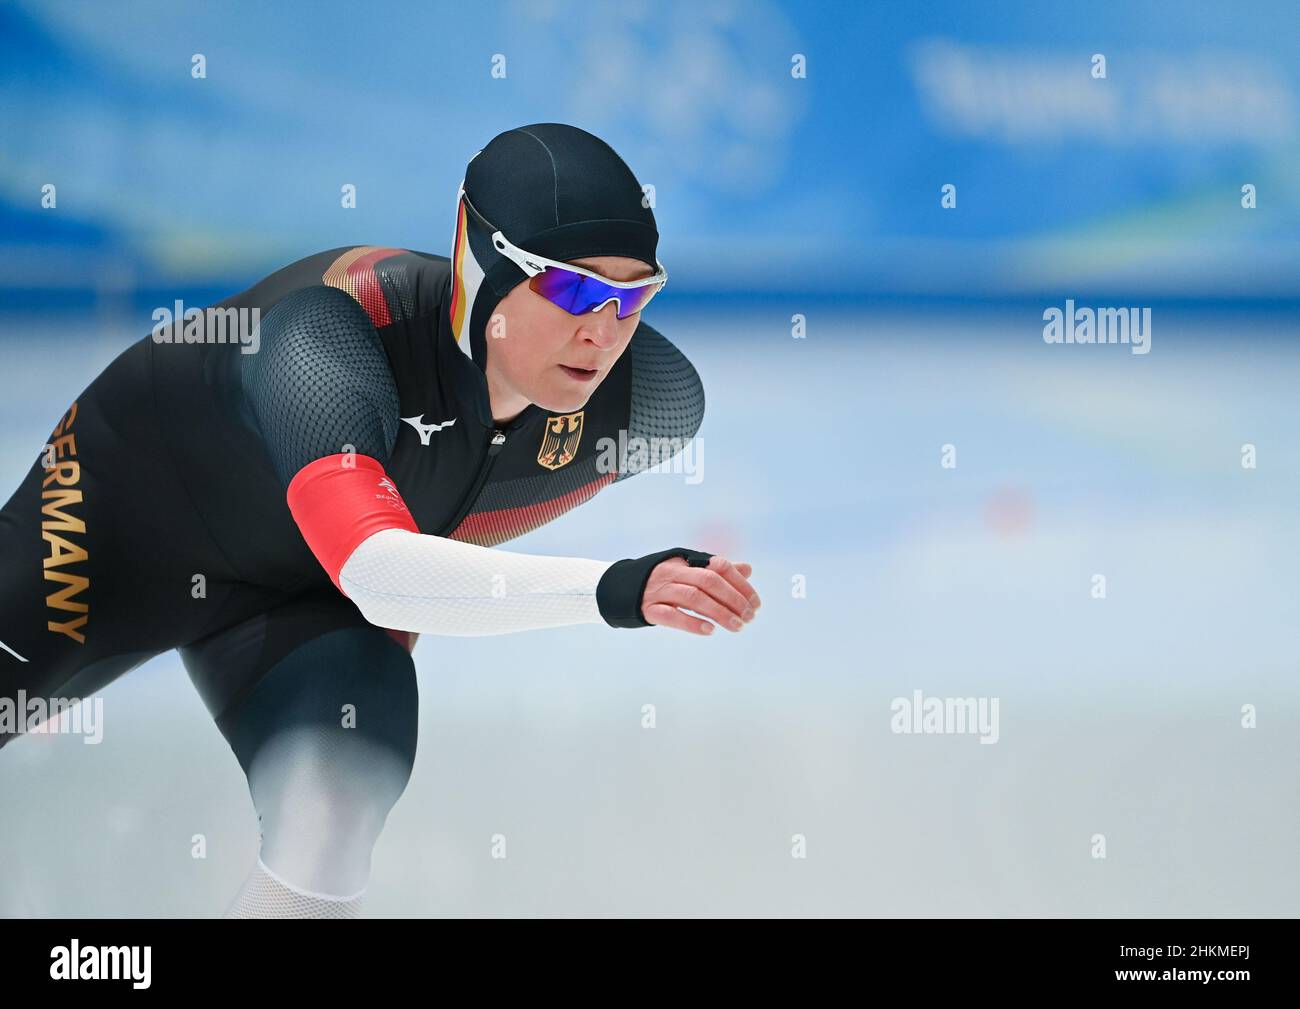 Beijing, China. 5th Feb, 2022. Claudia Pechstein of Germany competes during the women's 3,000m final of speed skating at the National Speed Skating Oval in Beijing, capital of China, Feb. 5, 2022. Credit: Wu Wei/Xinhua/Alamy Live News Stock Photo